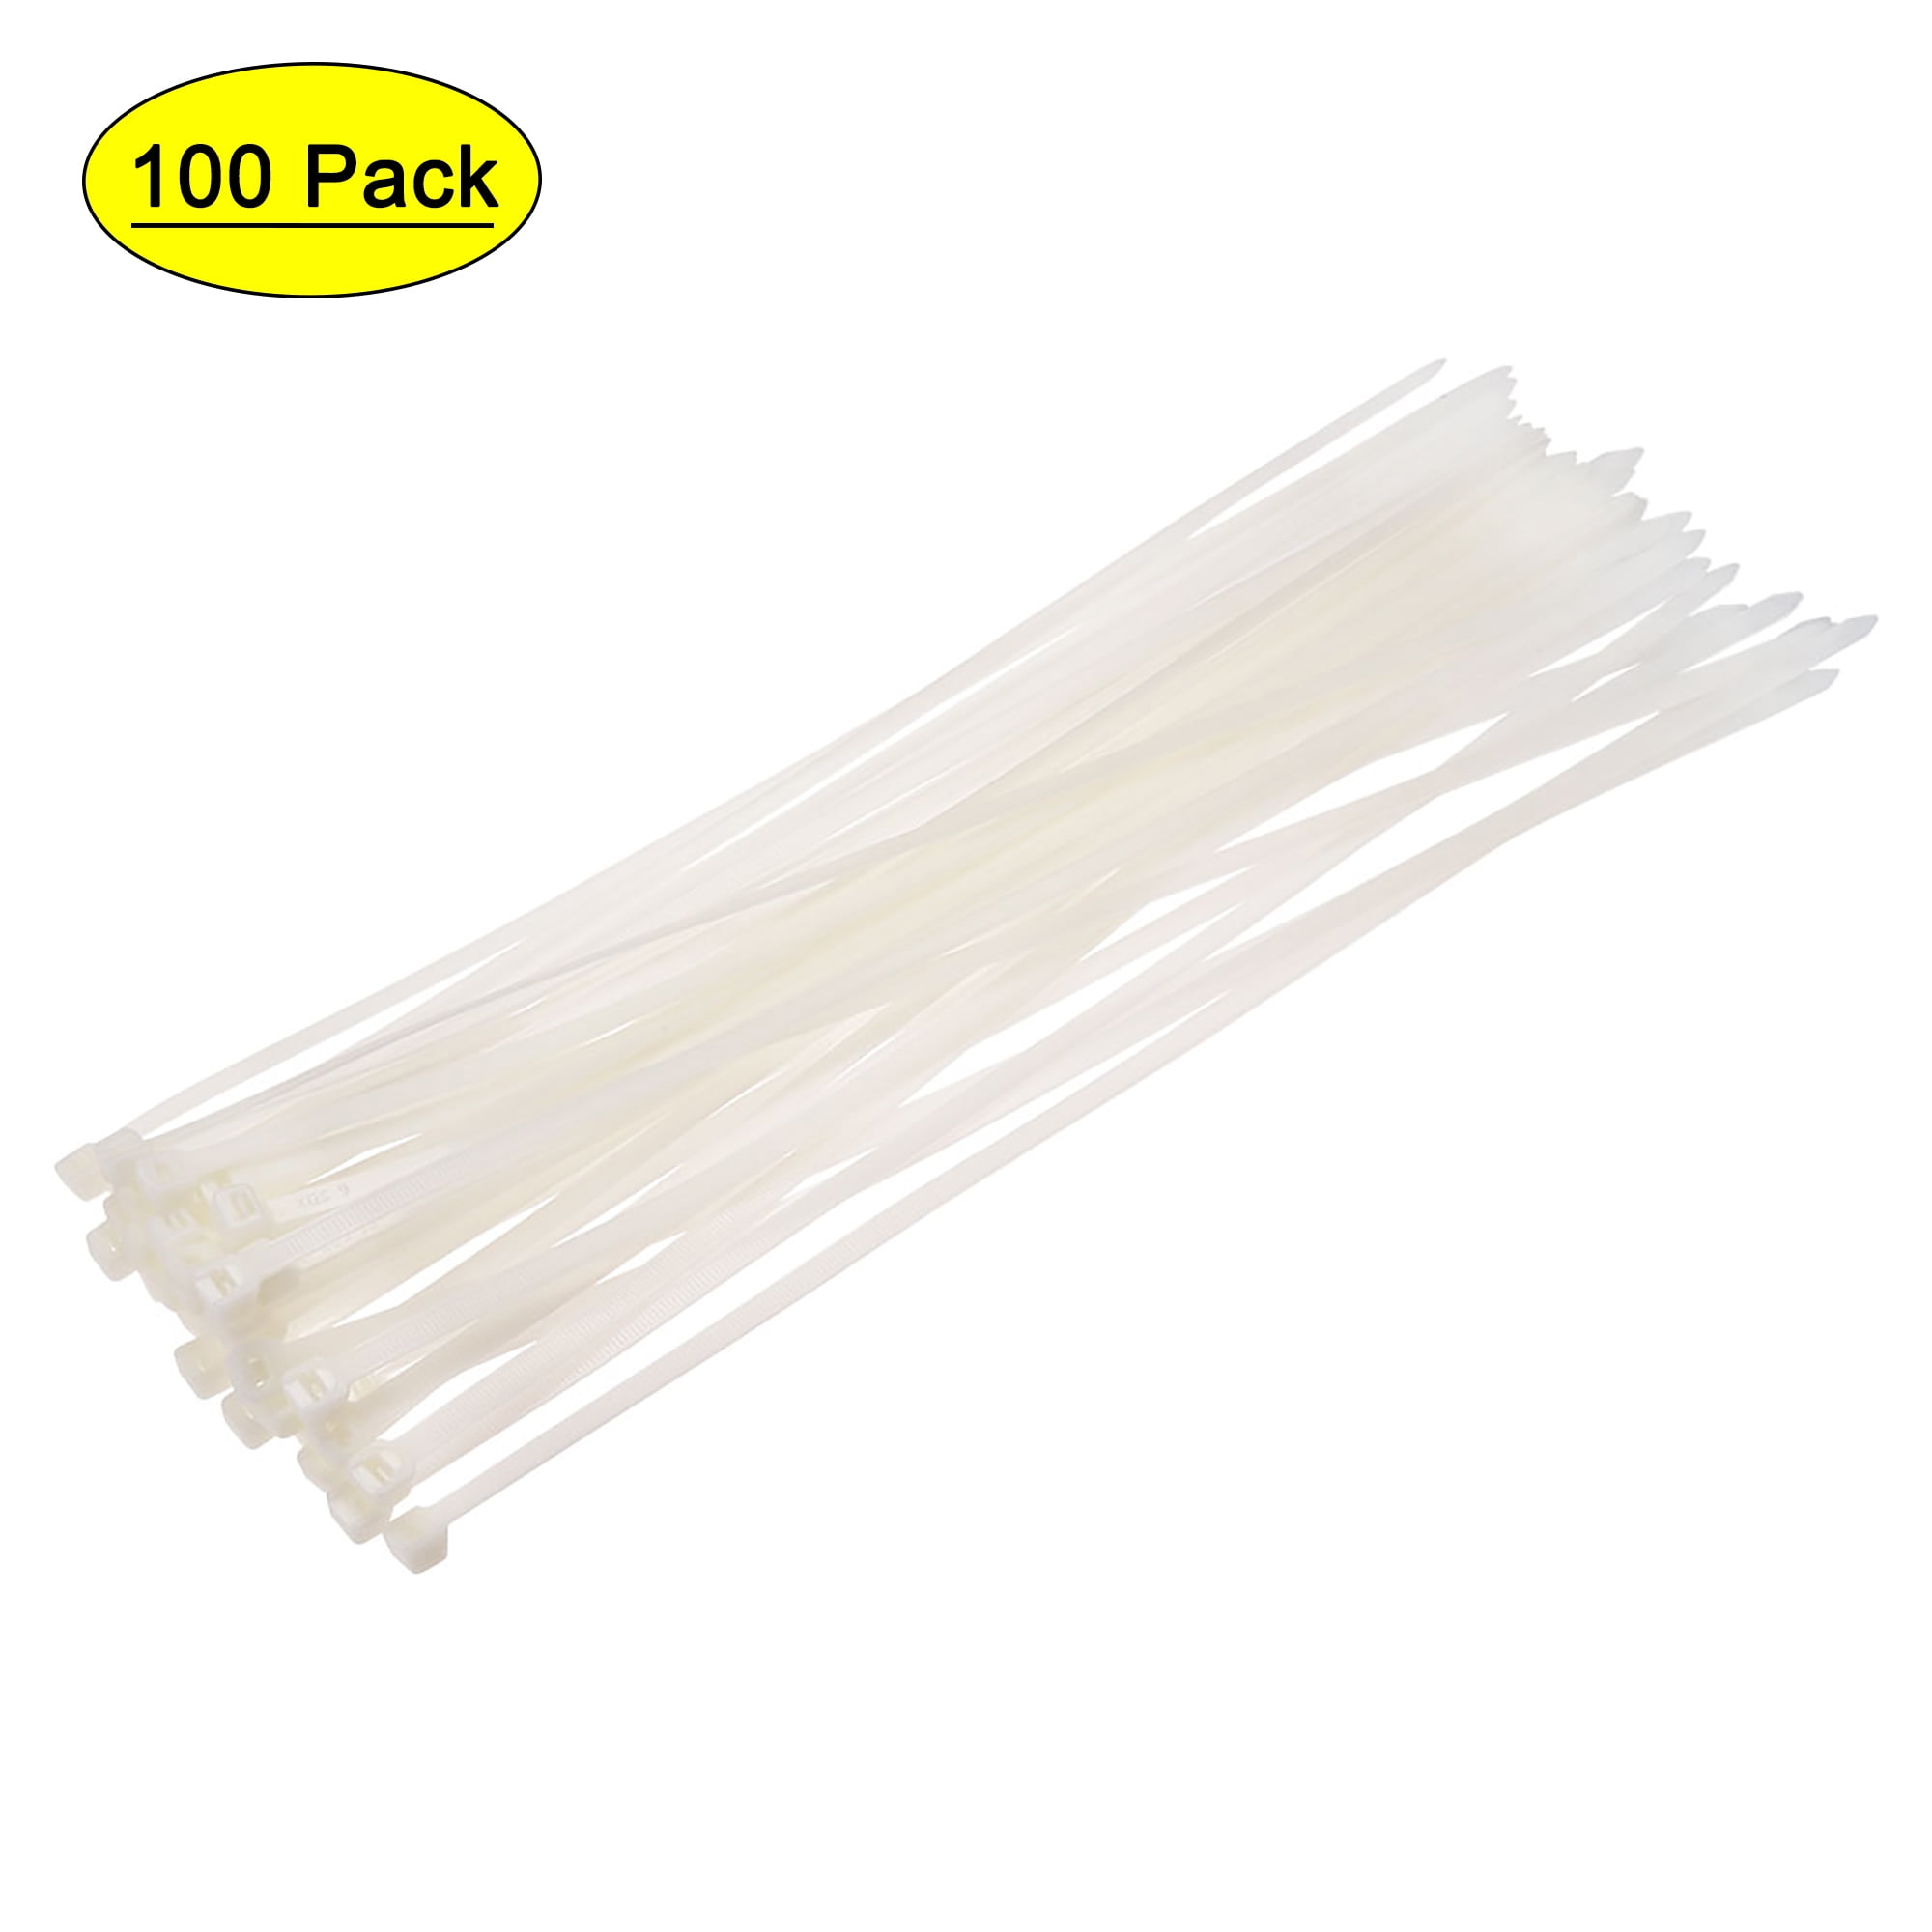 Kabelbinder Nylon Cable Ties with Label Tag 25 mm x 15 mm Self-locking Zip Ties